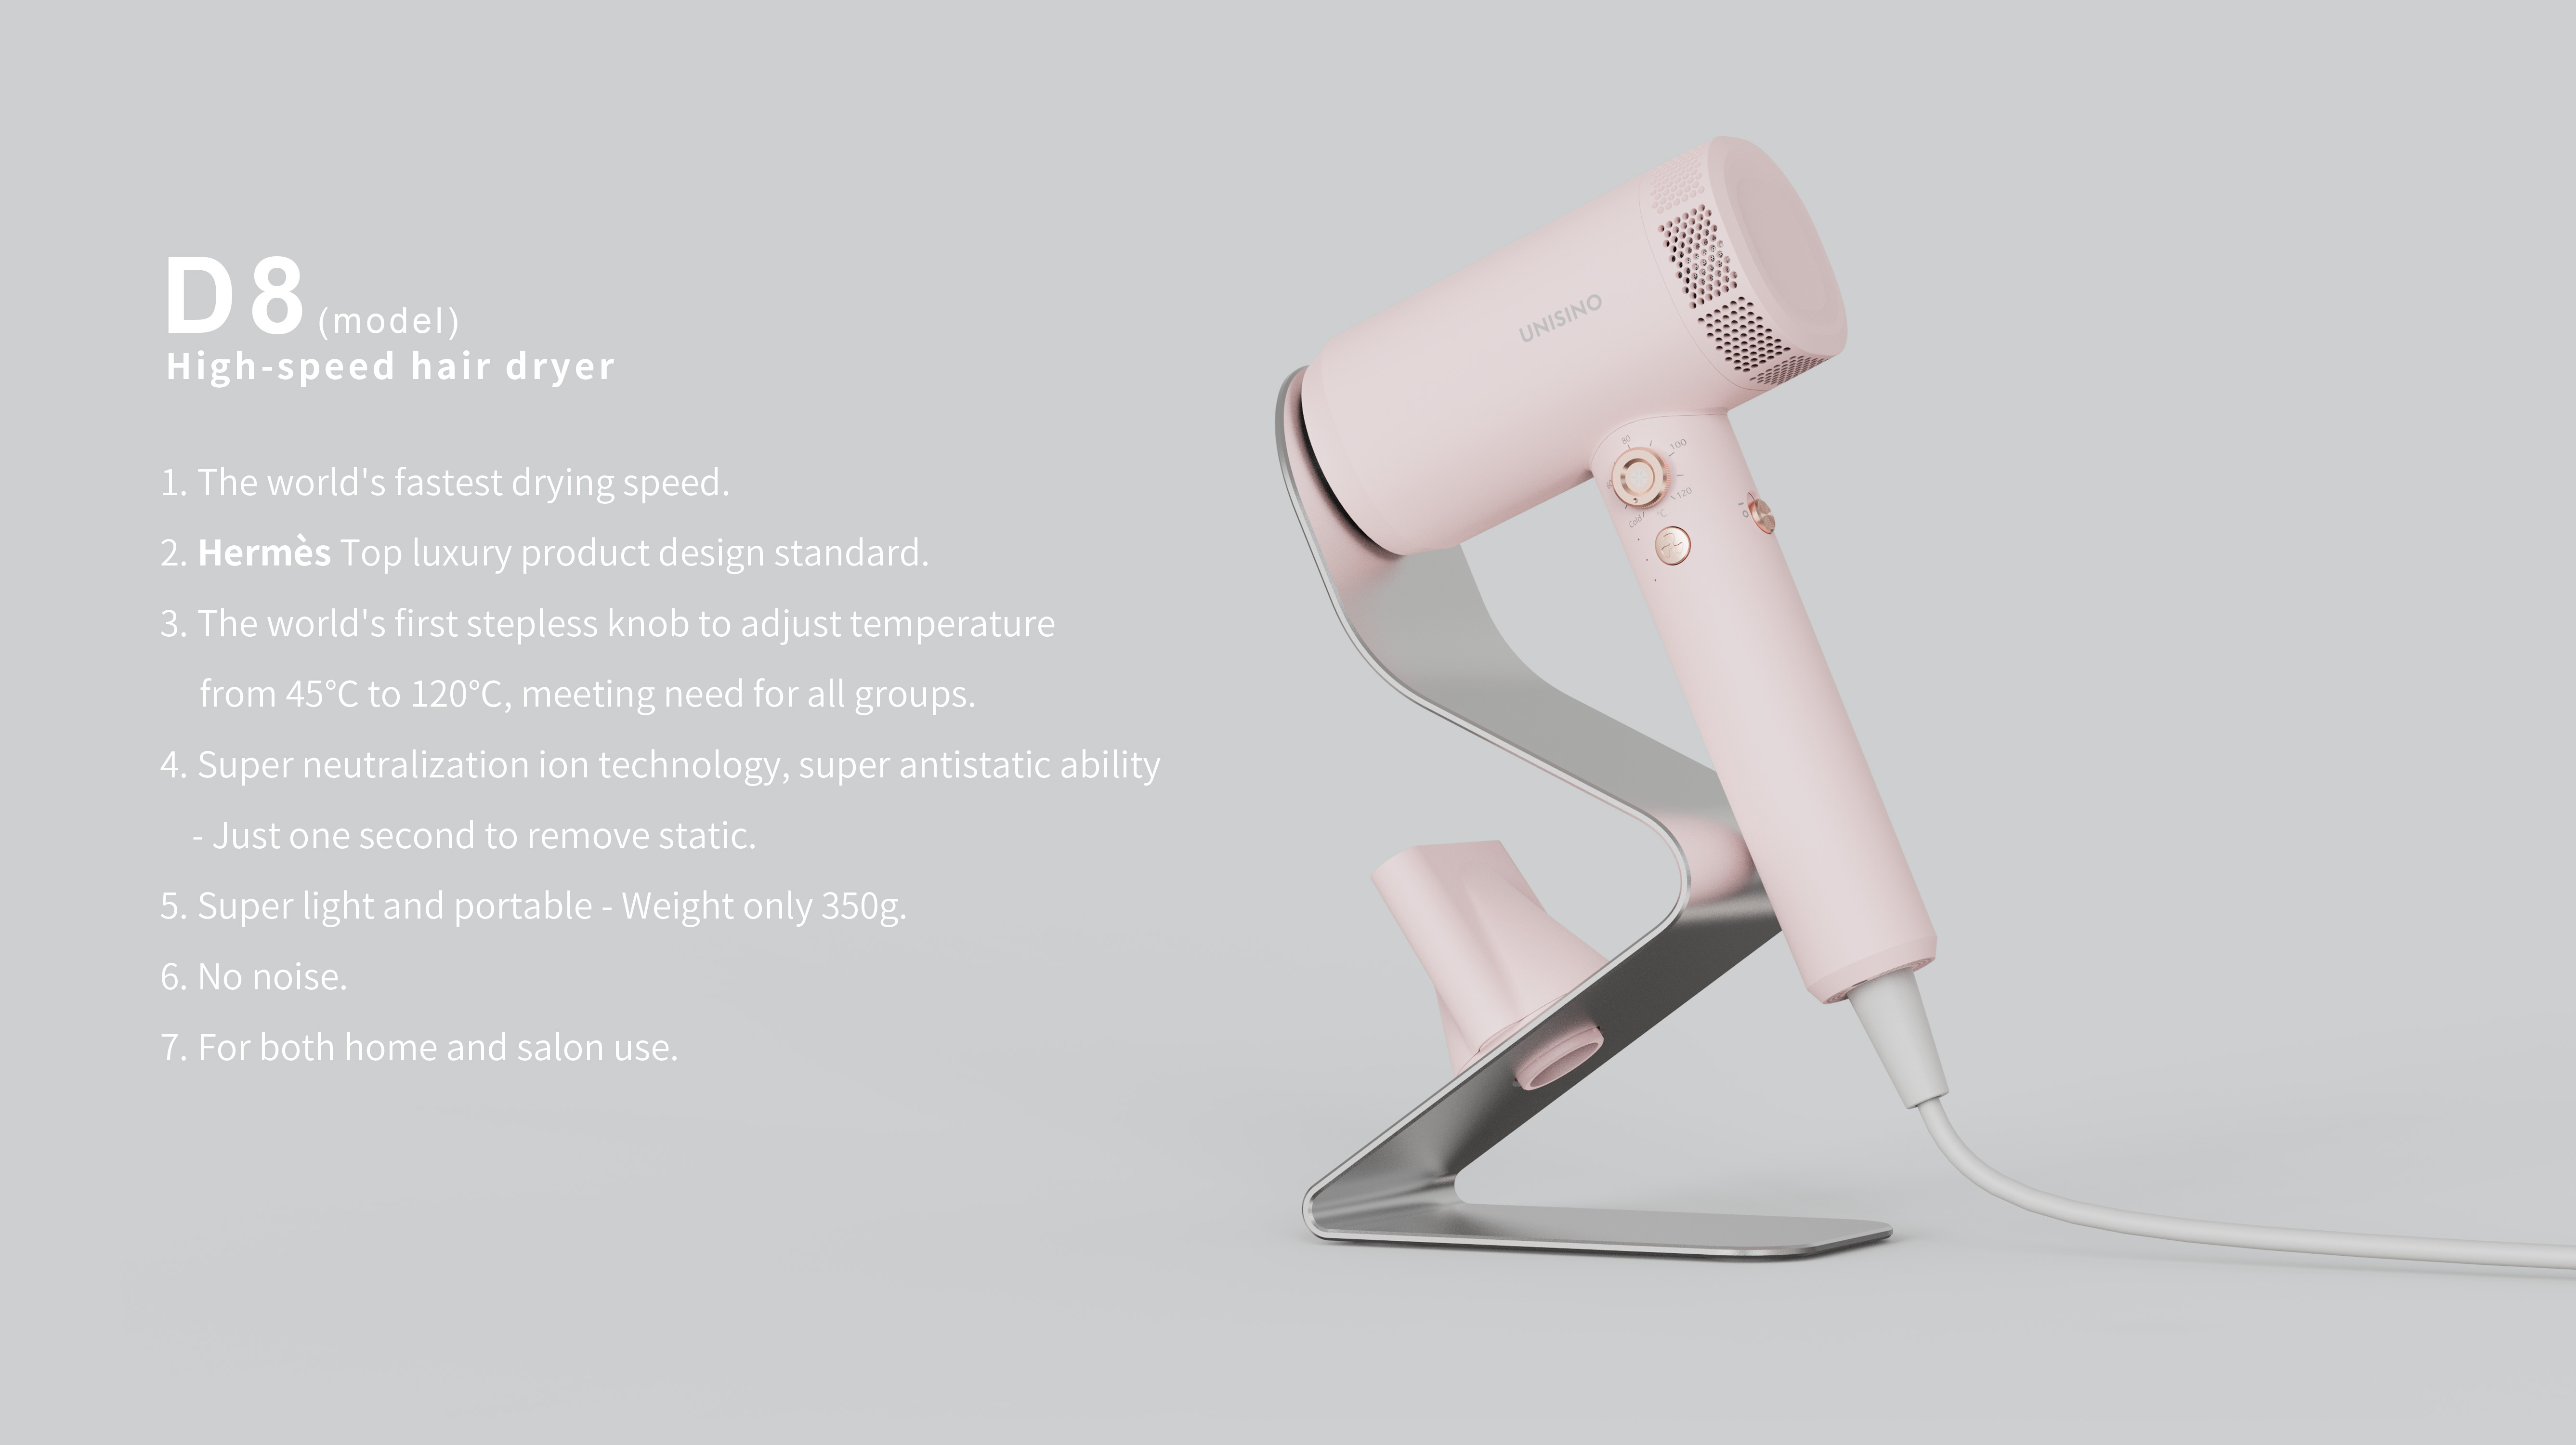 Technology hair care, high-speed hair dryers lead the trend of new trends